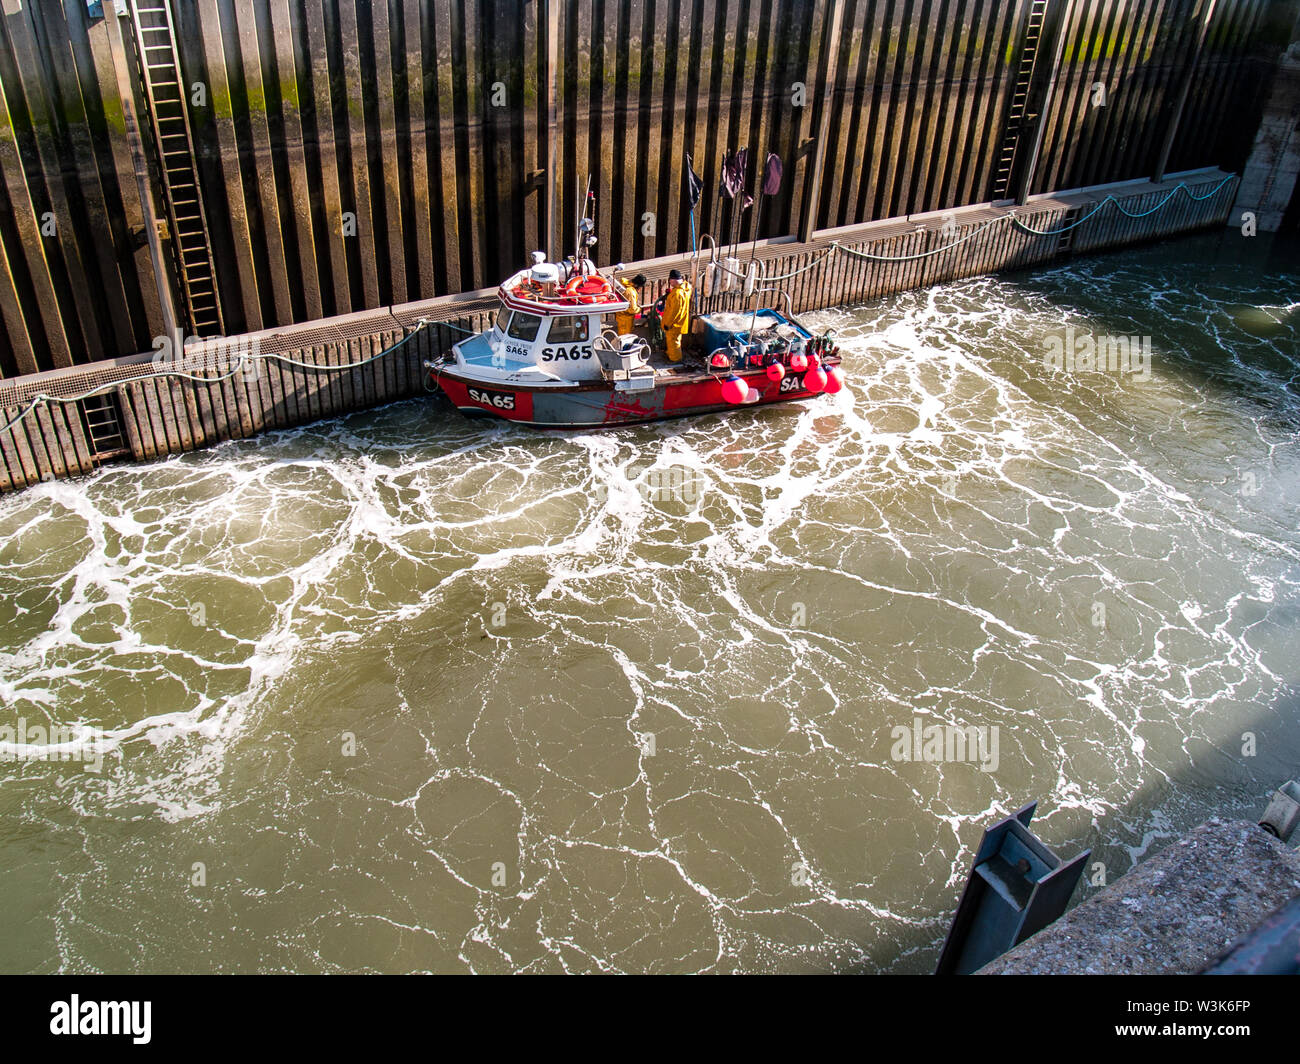 Tawe Barrage Lock in Swansea. A small fishing boat is in the lock as the lock is filled with water. Swansea marina, Wales, UK. Stock Photo